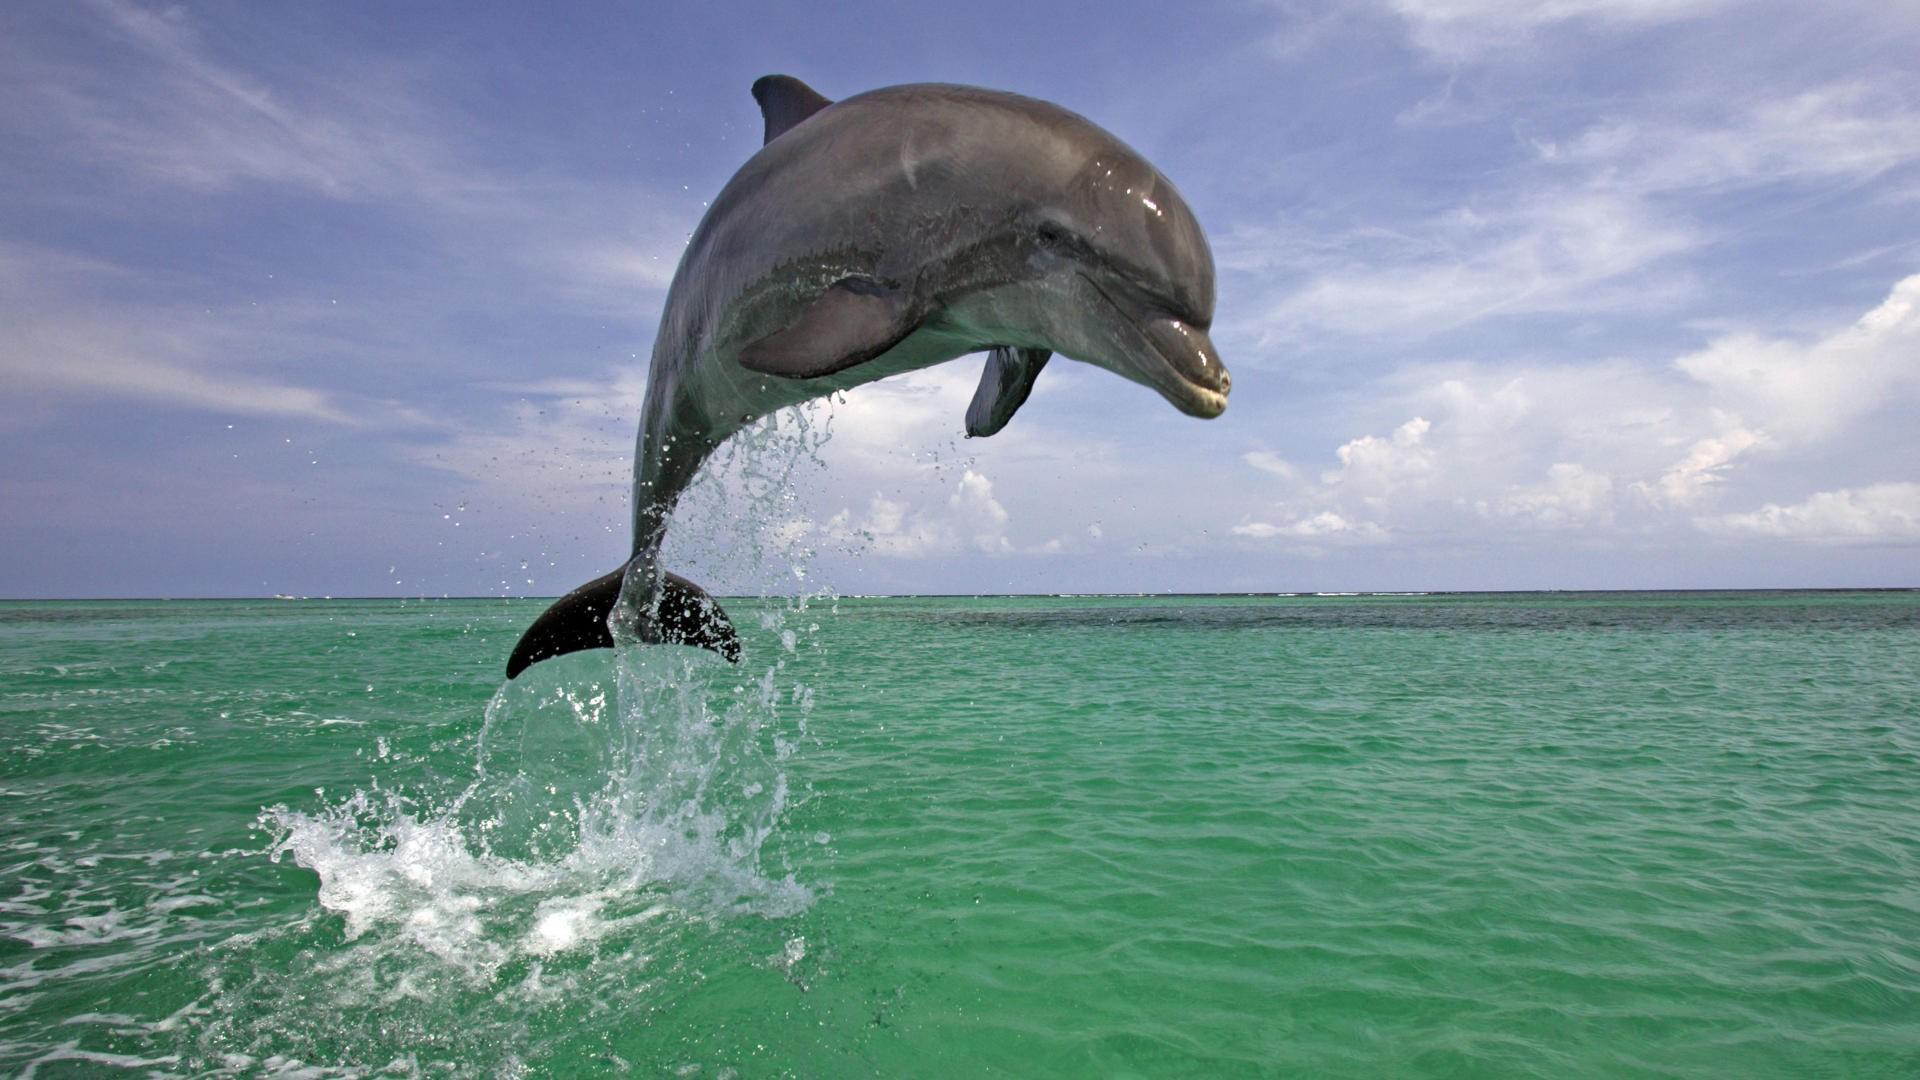 210+ Dolphin HD Wallpapers and Backgrounds